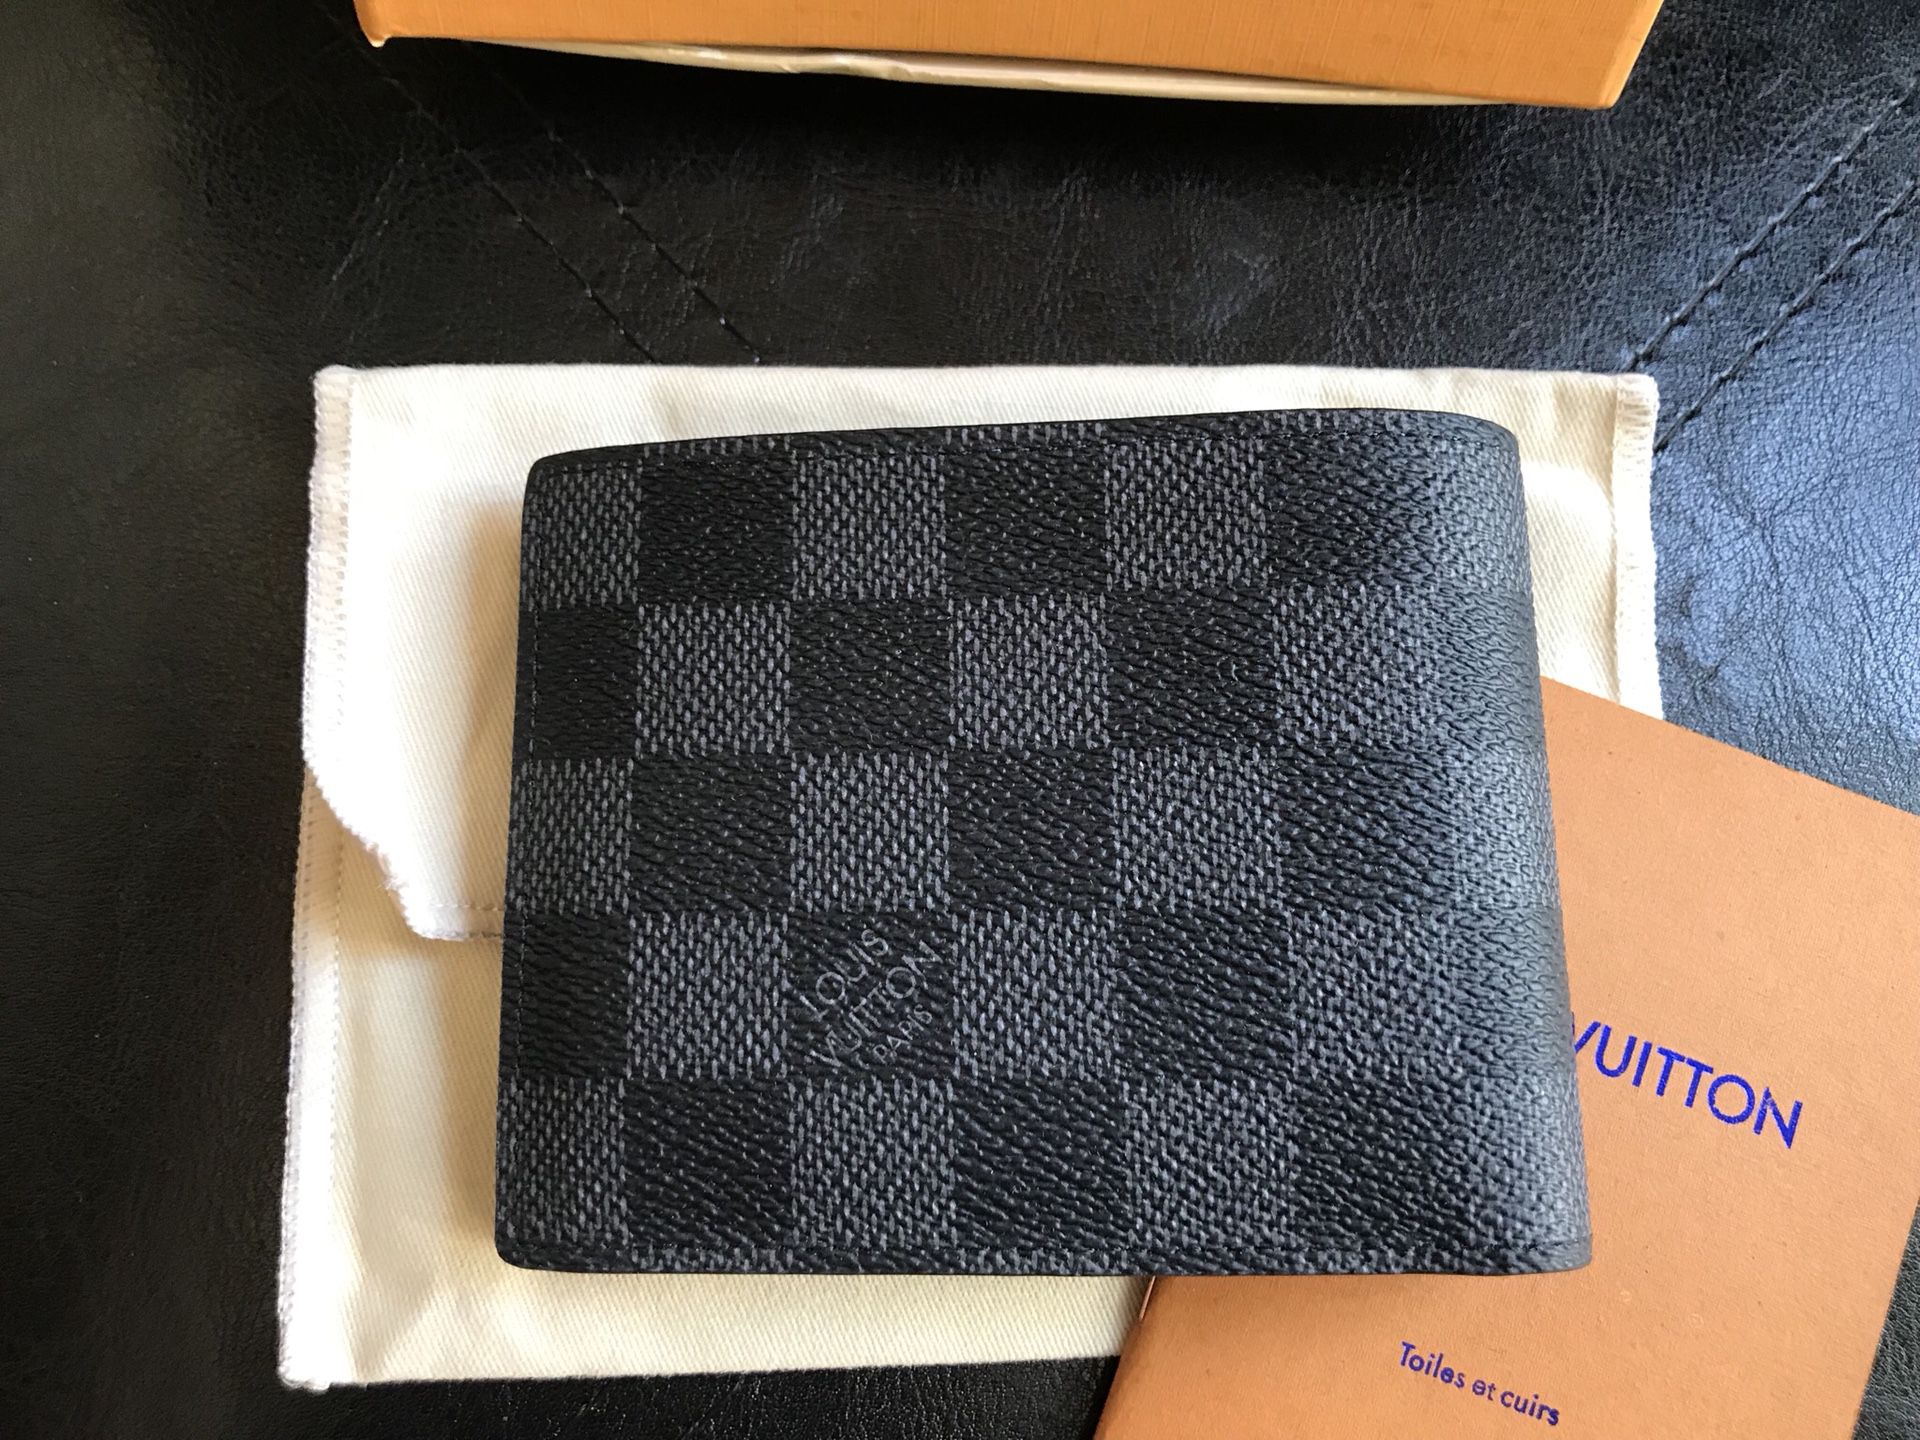 LOUIS VUITTON SLENDER WALLET N63263 (Damier Infini Leather) Onyx for Sale  in Richardson, TX - OfferUp